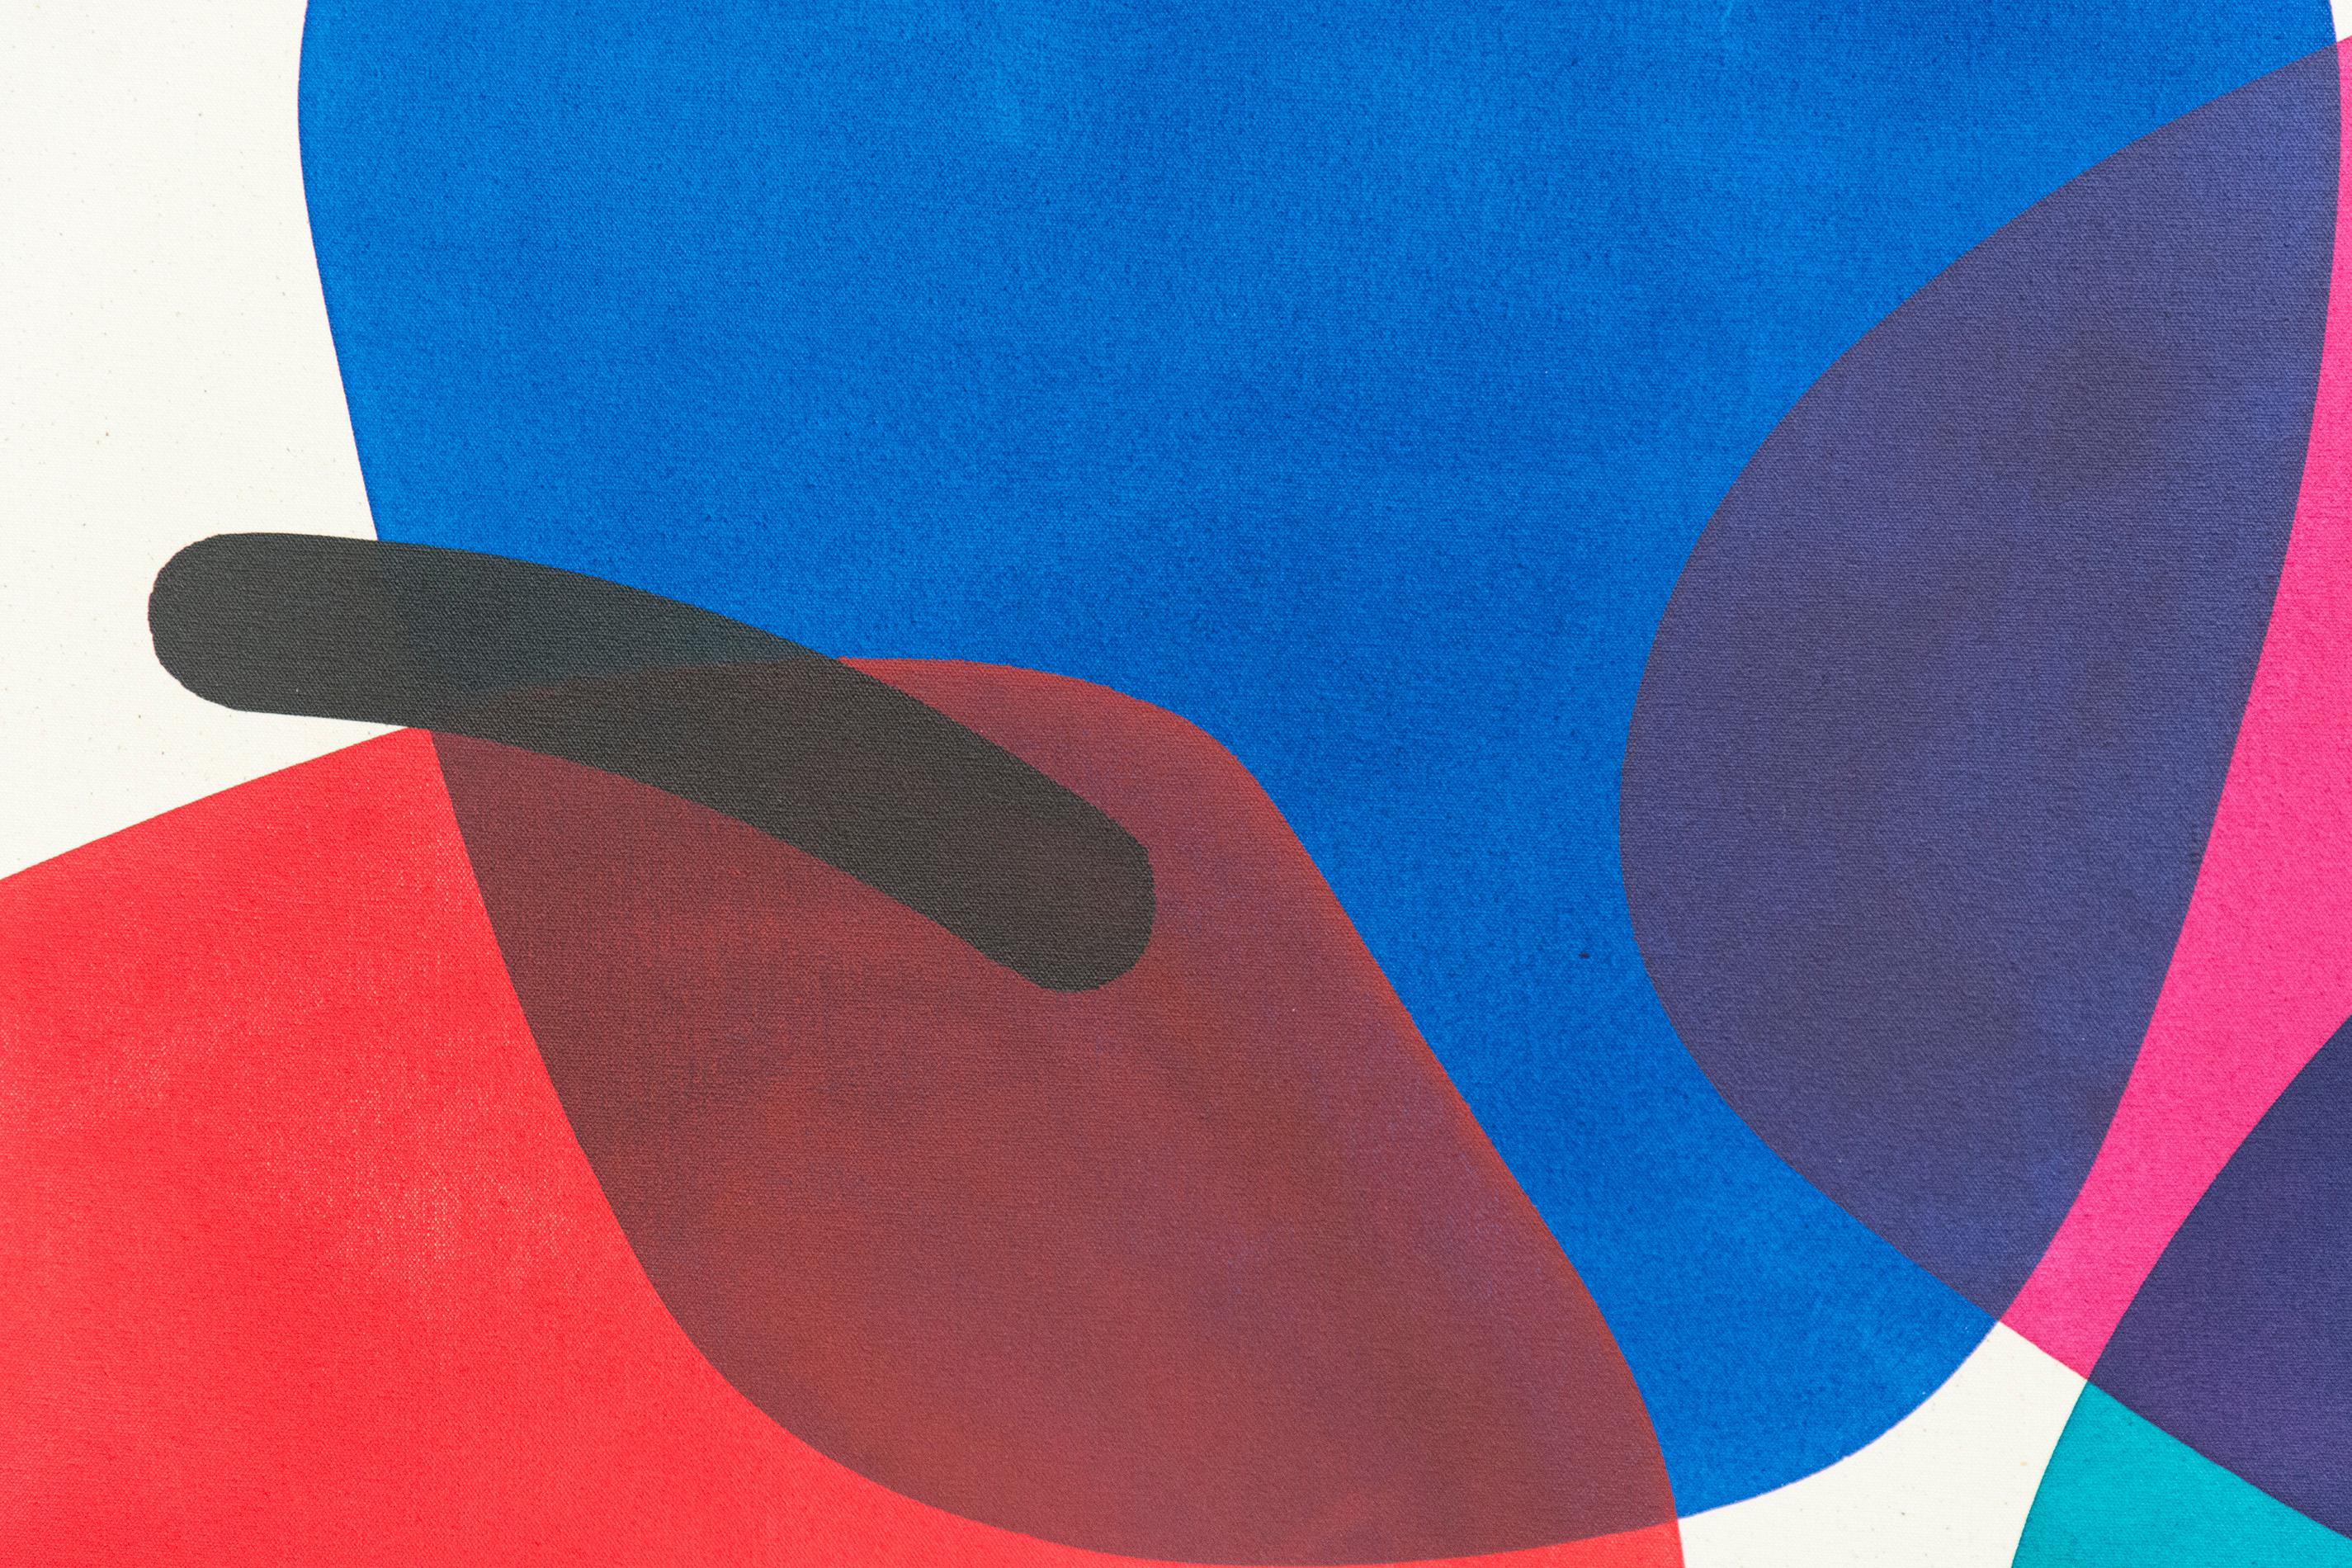 2 Yellow Suns with Red and Blue - Circular, oblong, and arched forms - Painting by Aron Hill